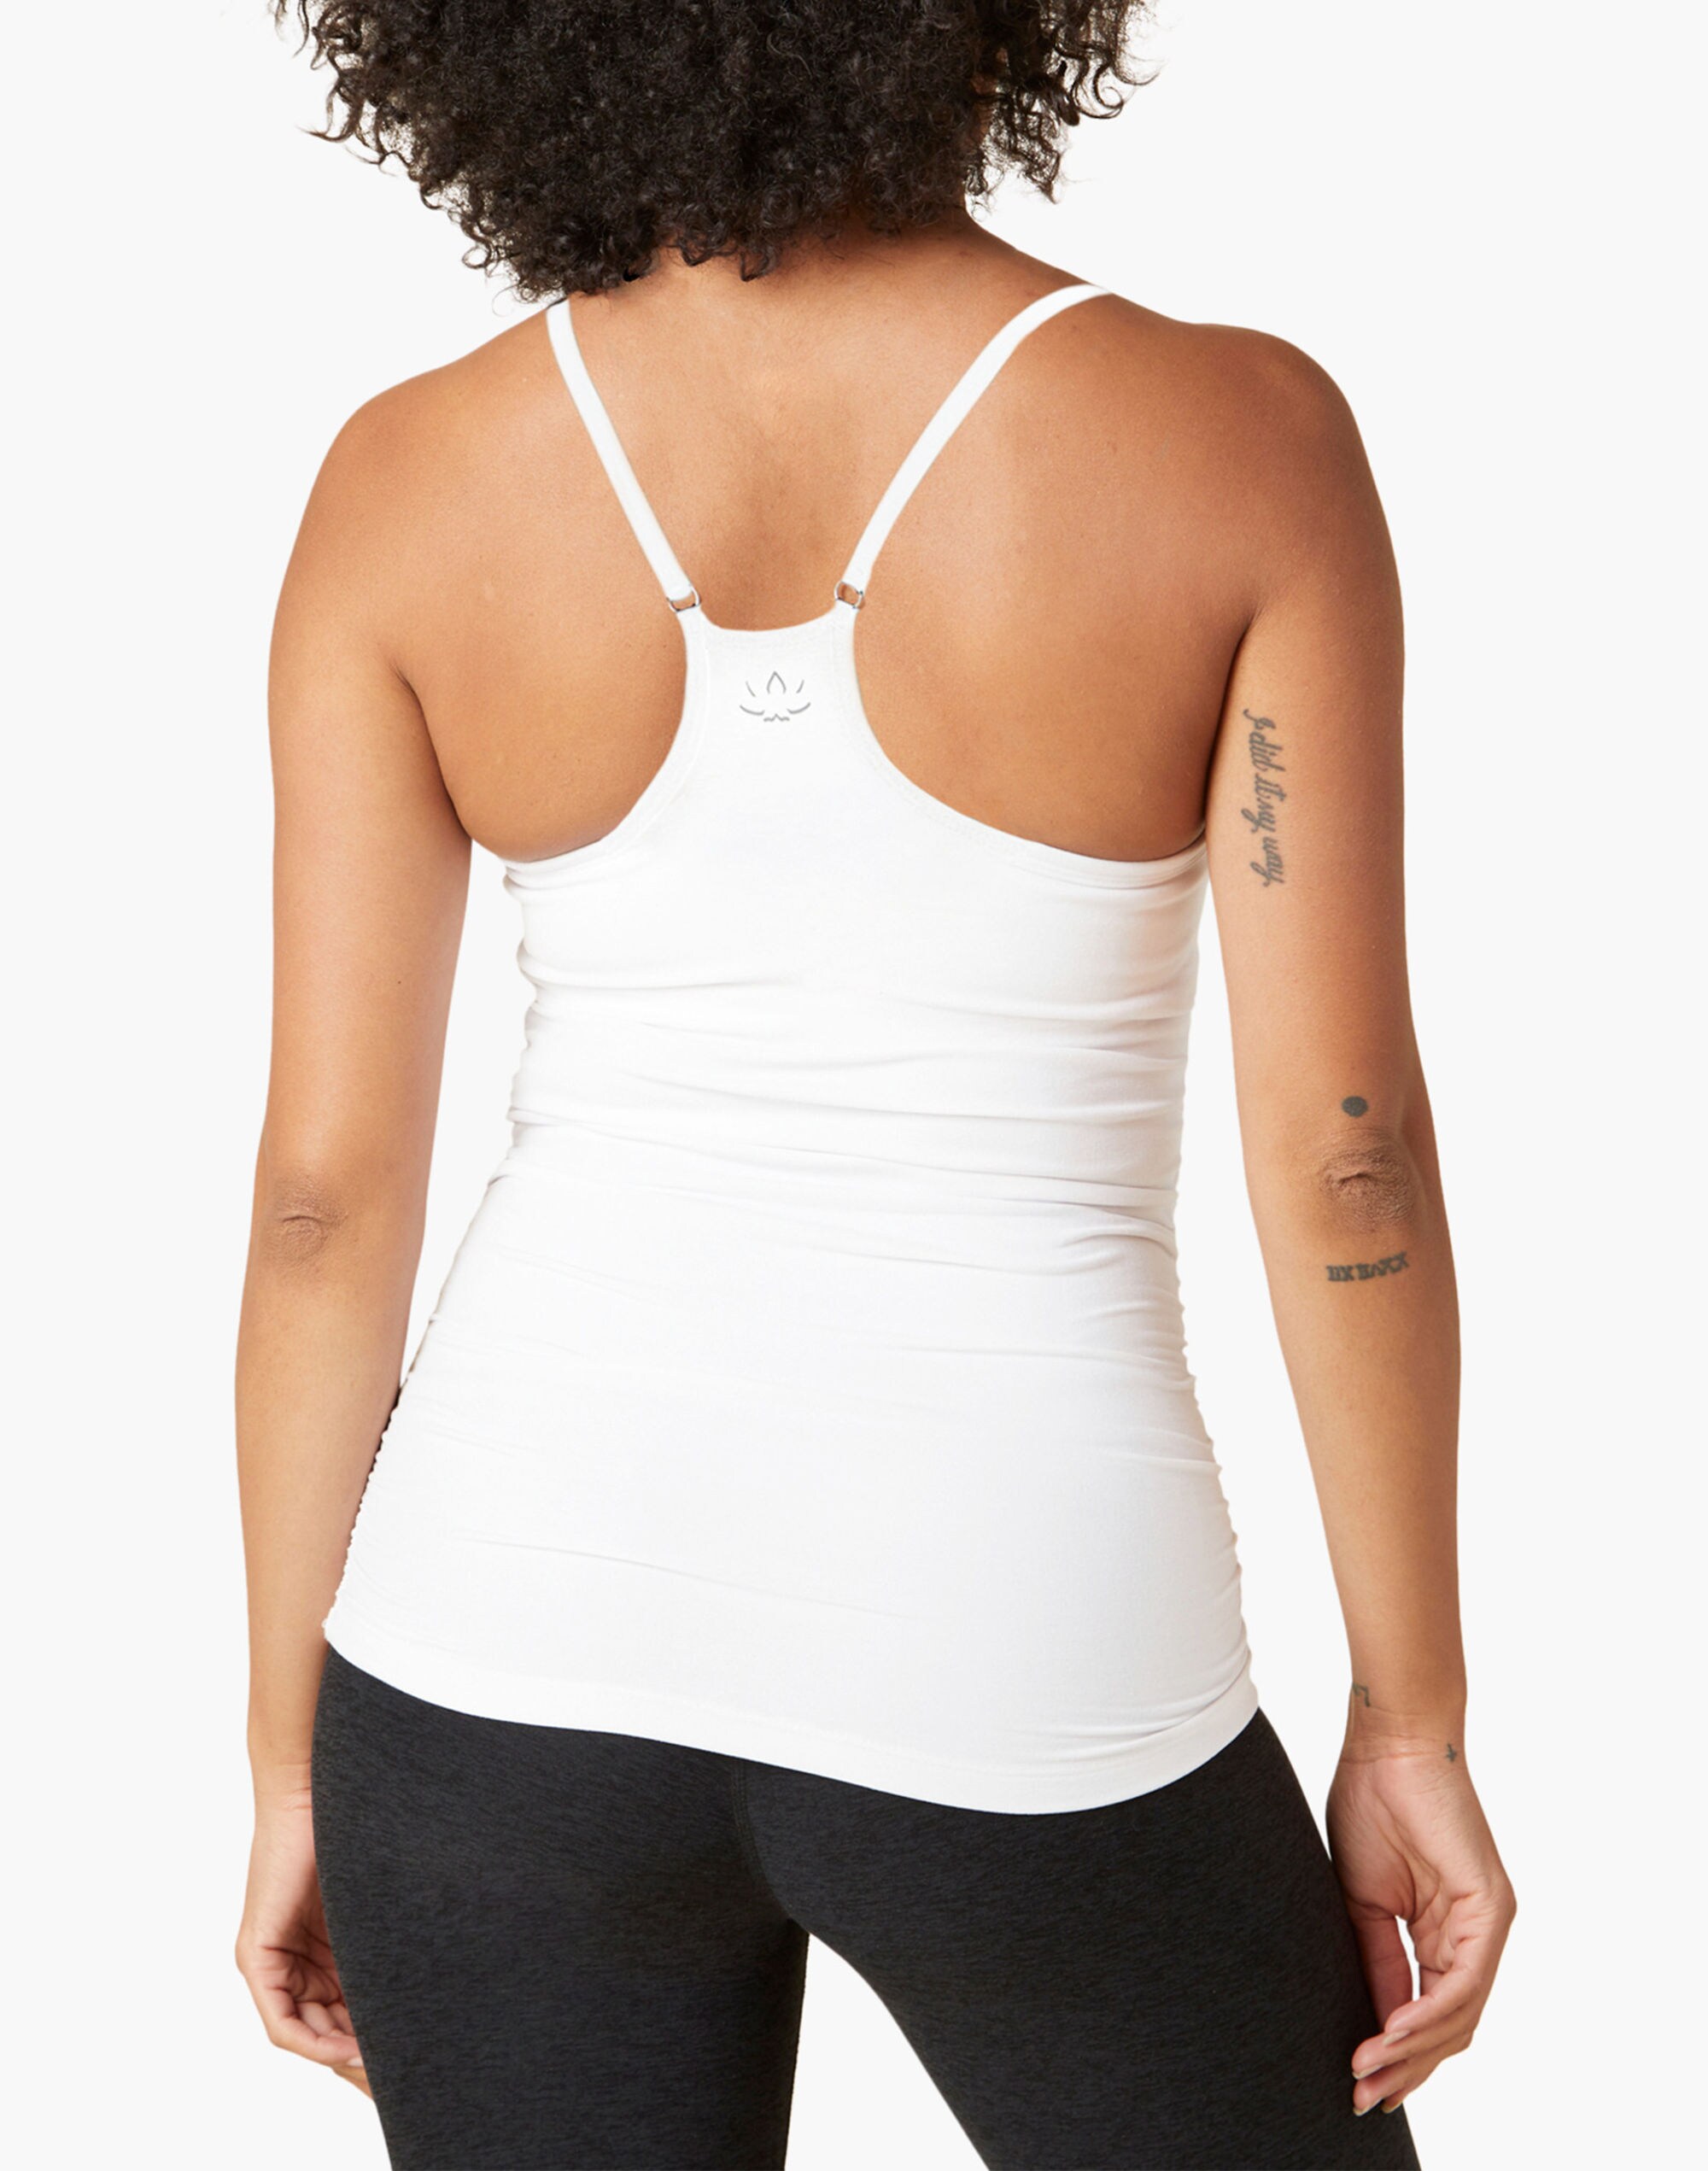 Featherweight Clip and Cuddle Nursing Cami